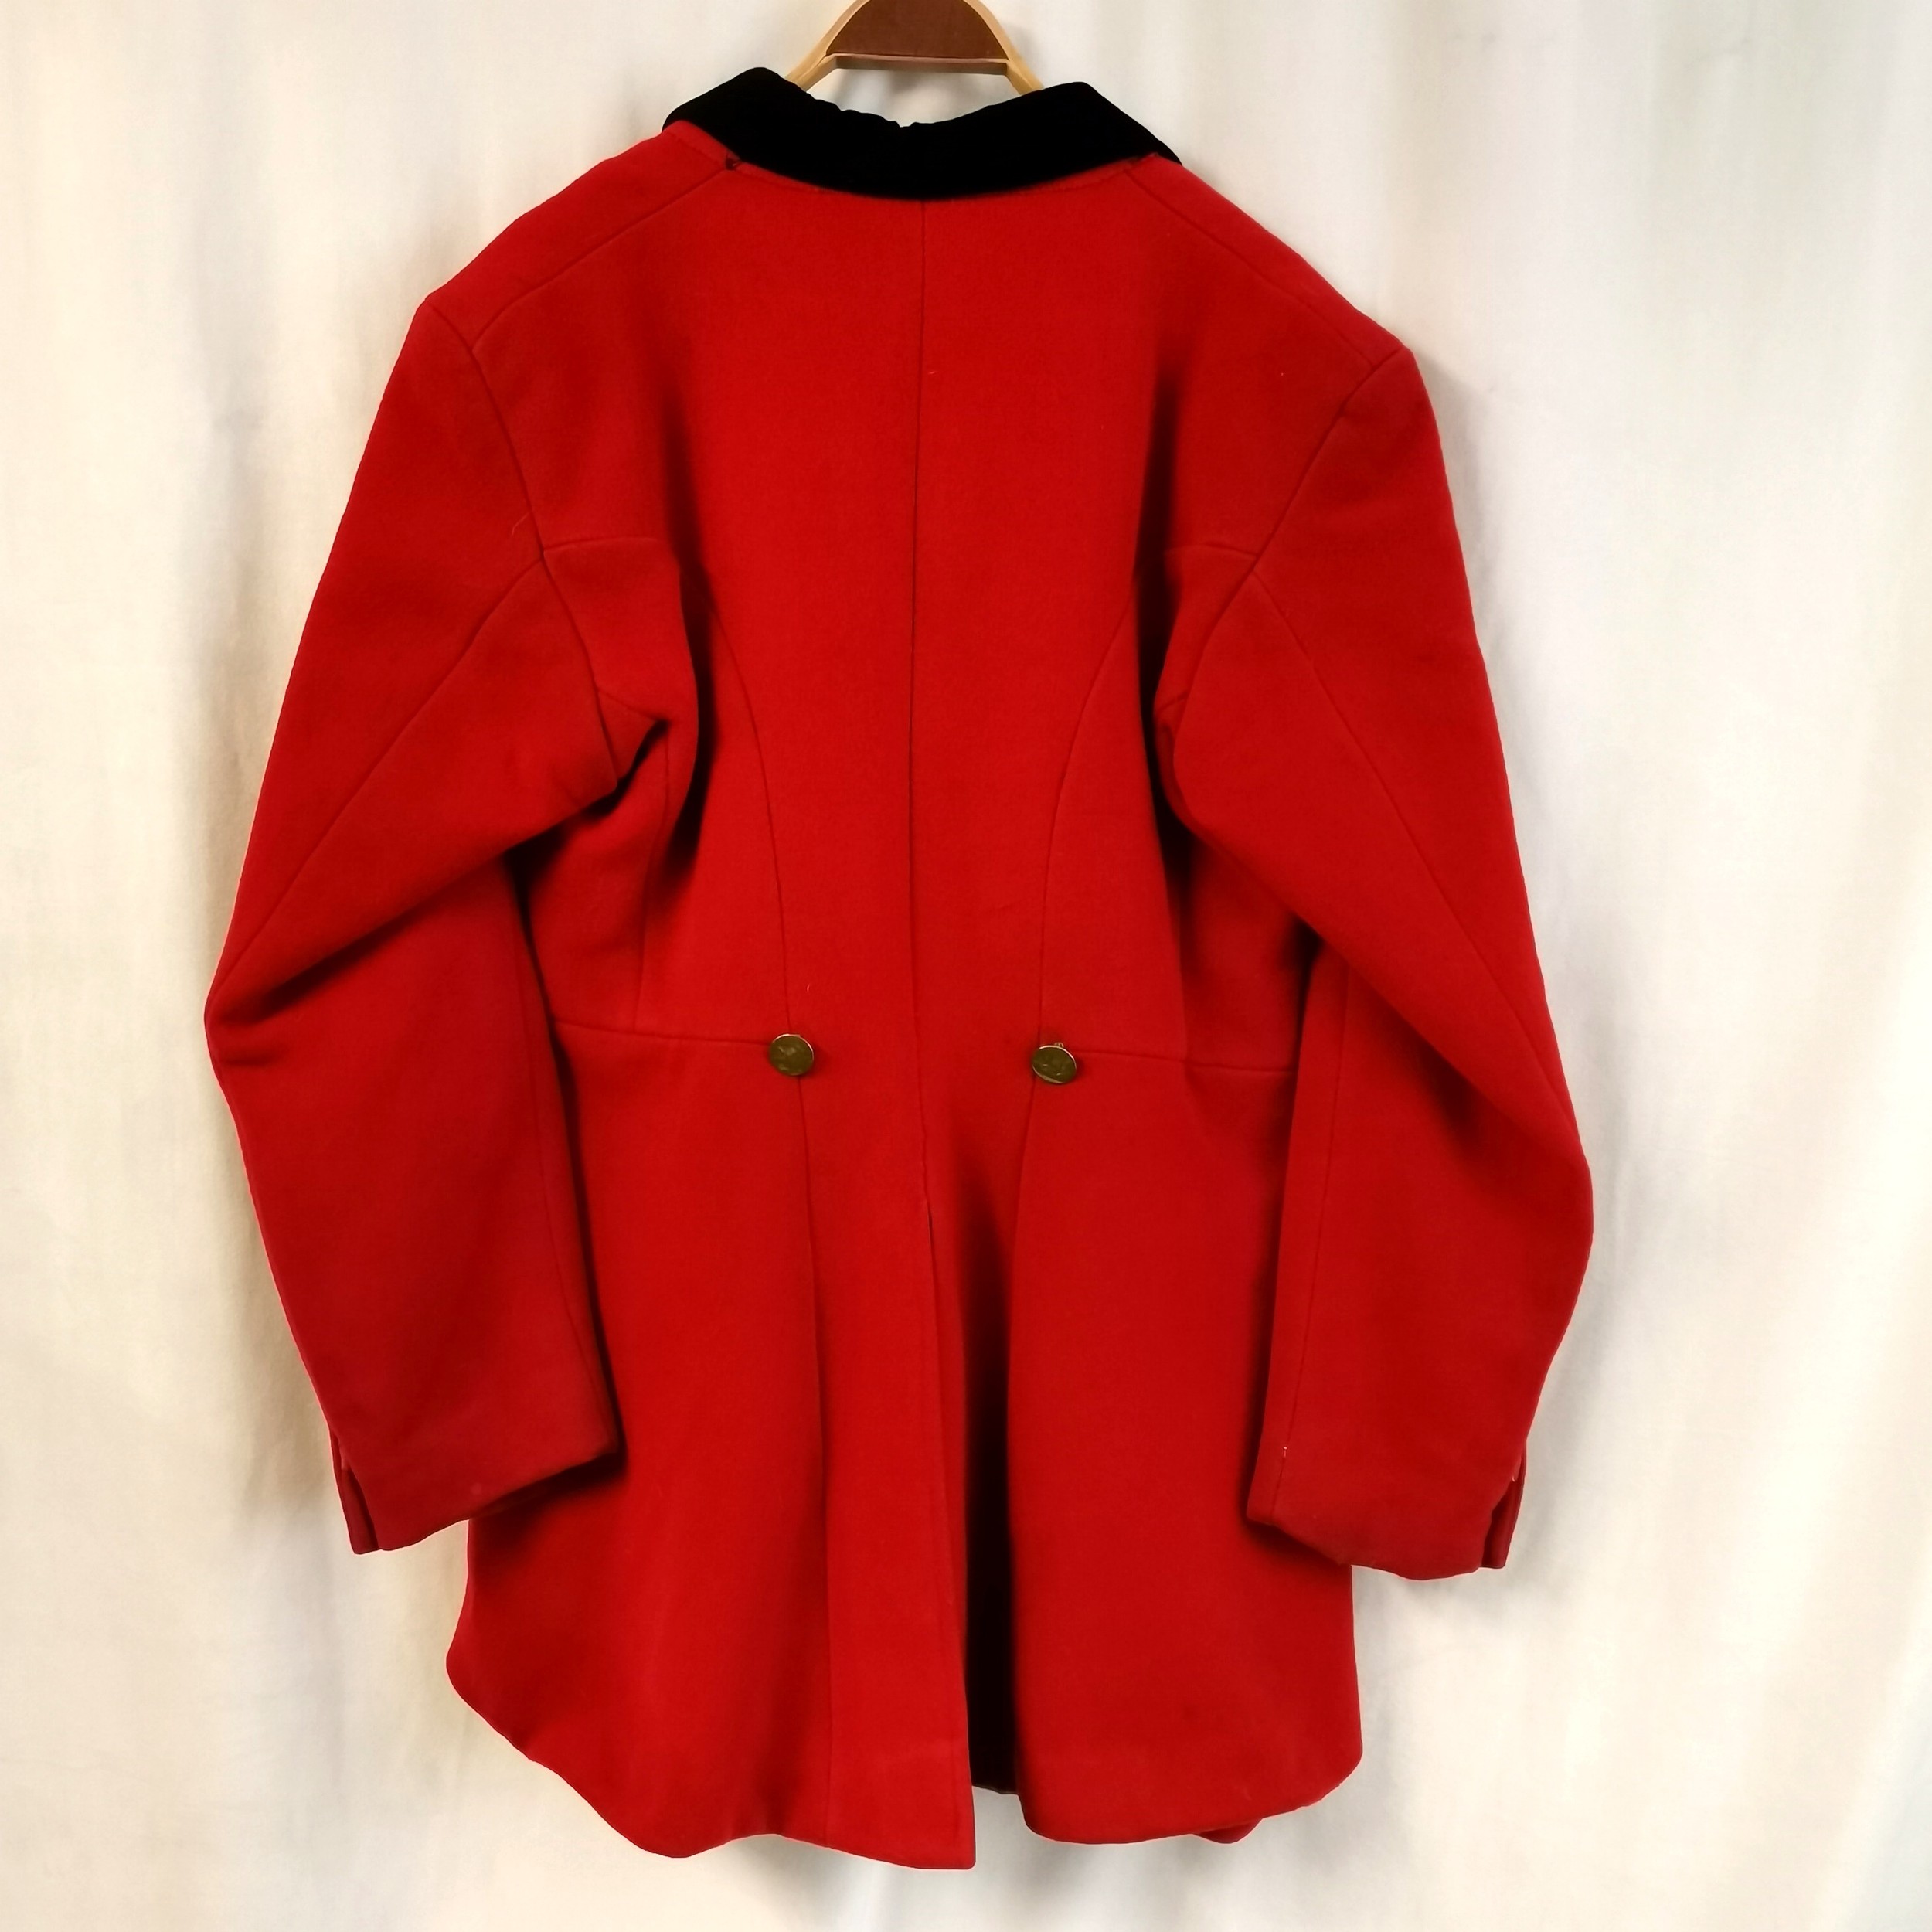 Vintage red hunting jacket with black velvet collar by Samuel Taylor with 5 brass buttons - 48cm - Image 2 of 6